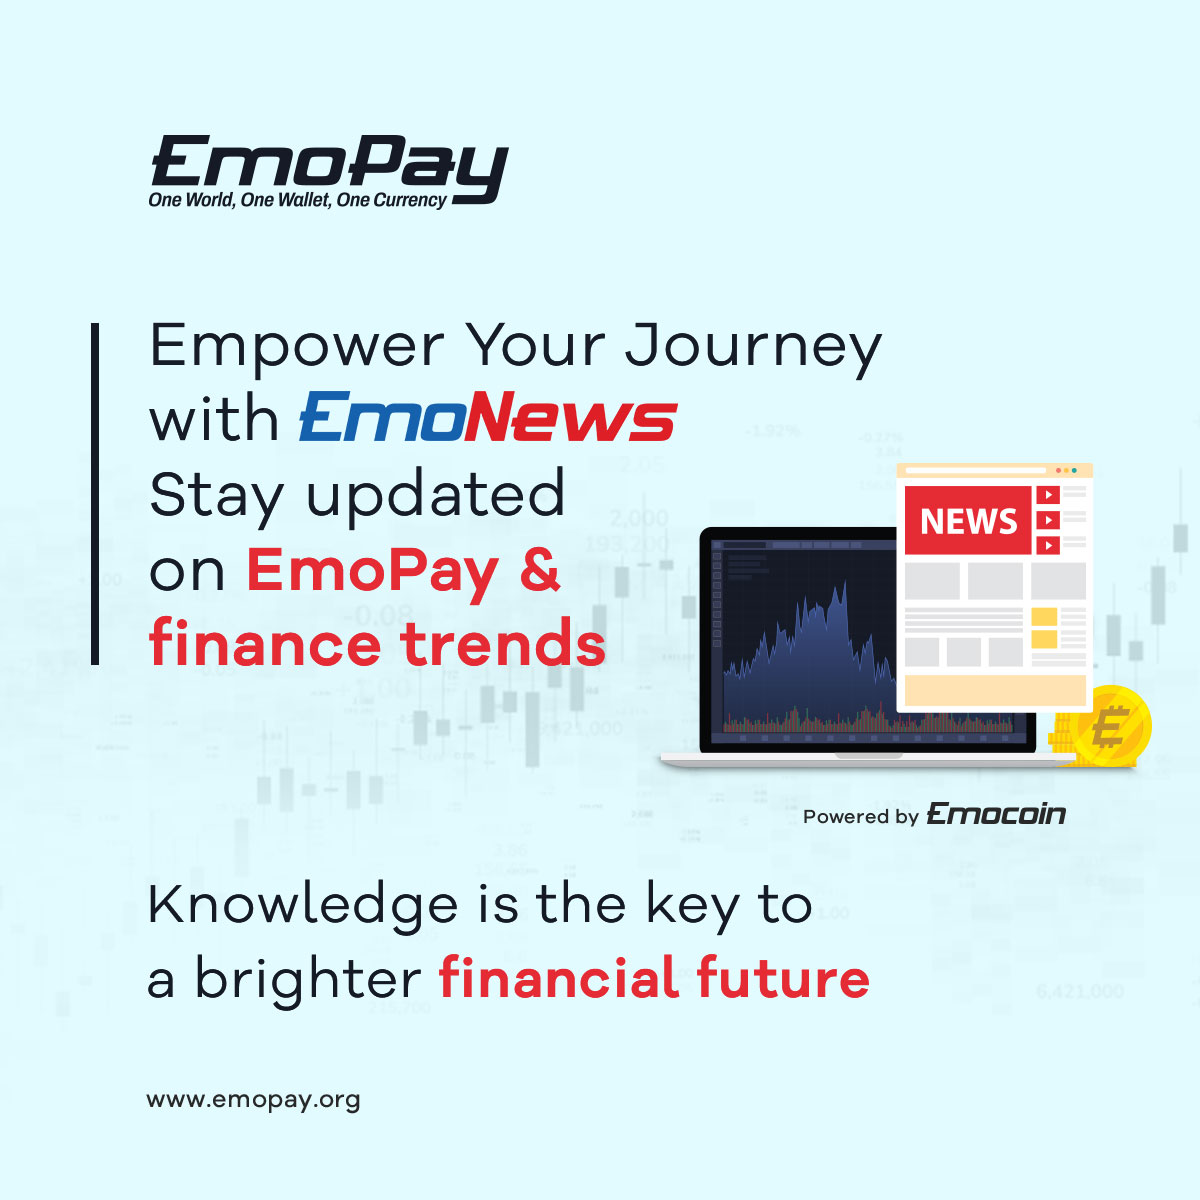 Emonews keeps you informed about EmoPay and financial opportunities.💰

Visit 👉🏻 emonews.digital

#Emonews #Emopay #FinancialUpdates #Crypto #StayInformed #BreakingNews #Finance #GlobalFinance #Emocoin #cryptocurrency #insights #MarketTrends #updates #Analytics #Tuesday